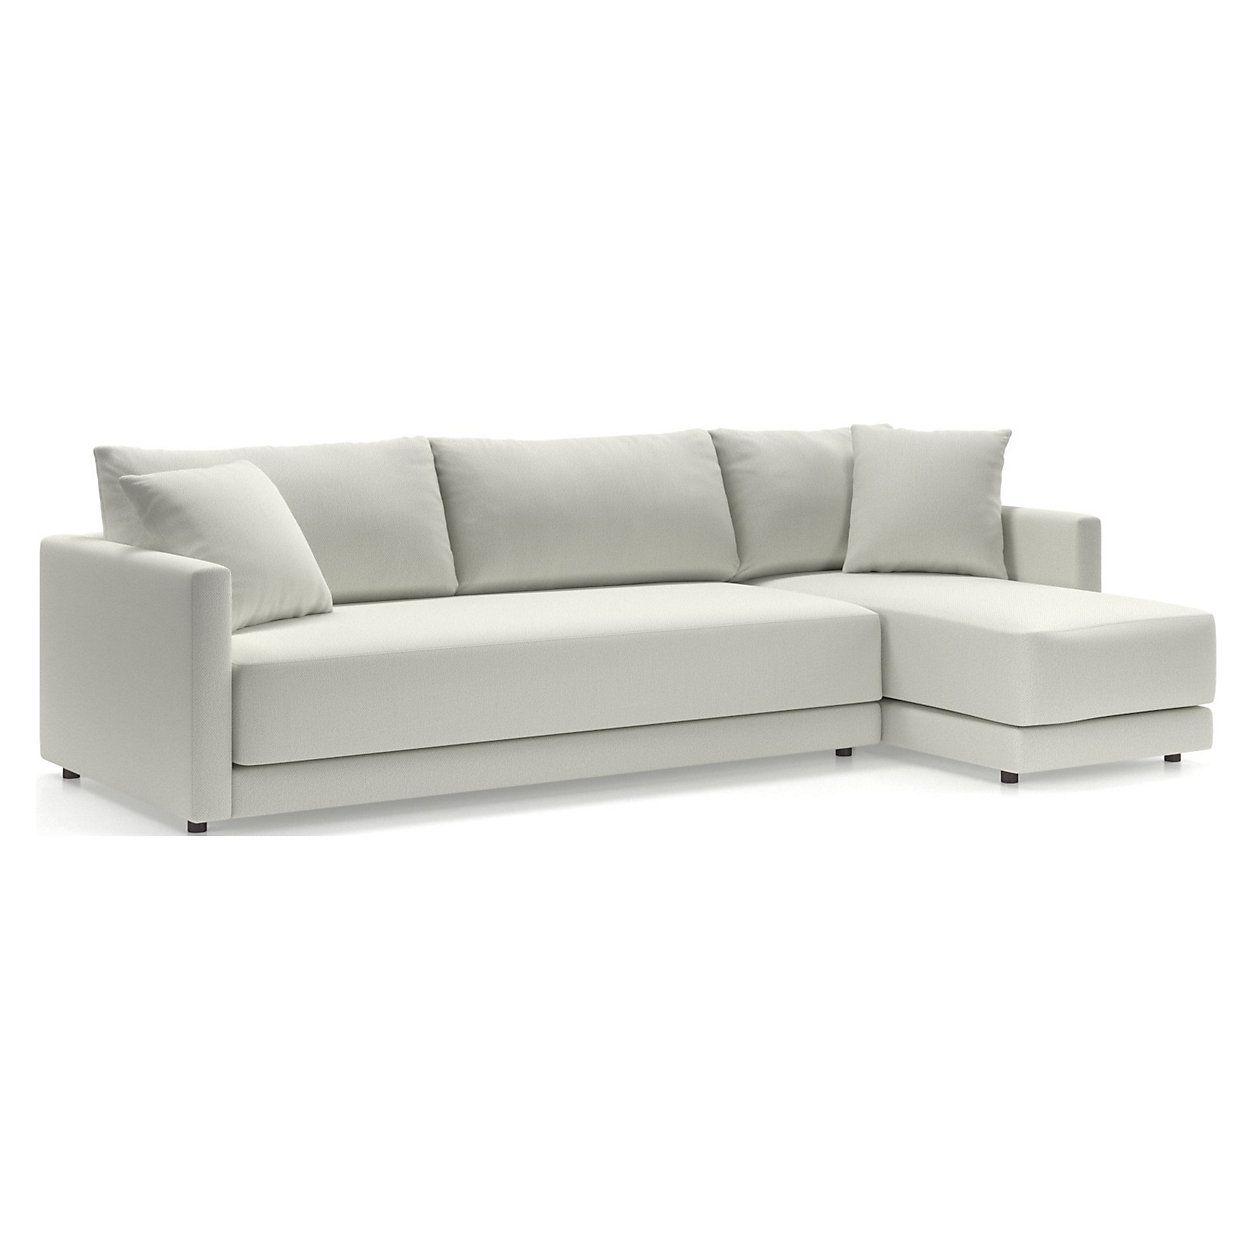 Gather Deep 2-Piece Chaise Bench Sectional + Reviews | Crate & Barrel | Crate & Barrel